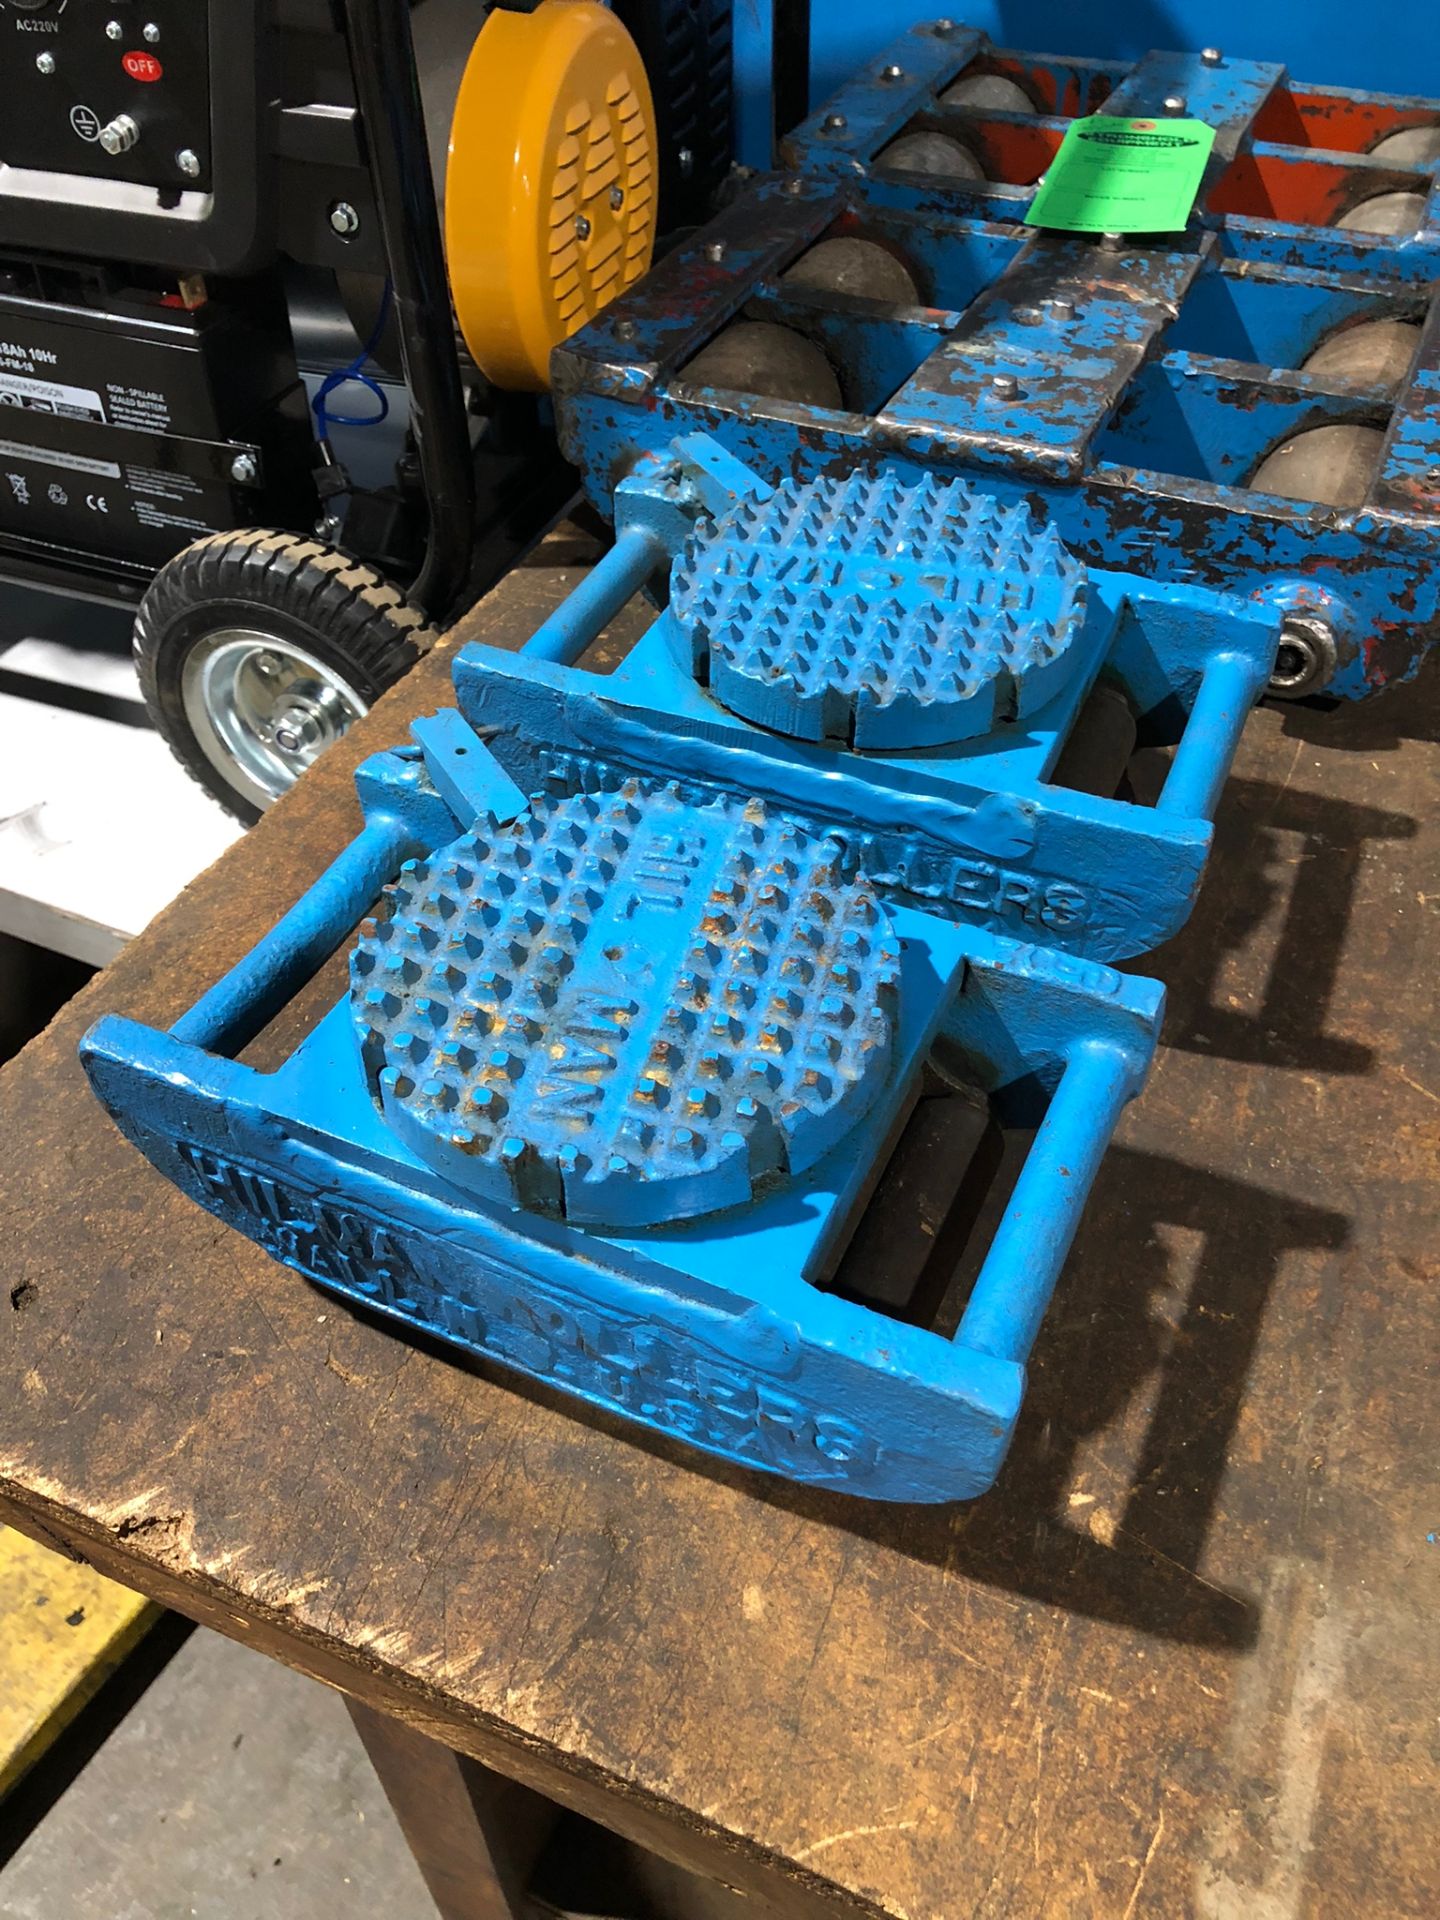 Lot of 2 (2 units) Hilman Rollers 15 Ton total (7.5T each) - Image 3 of 3